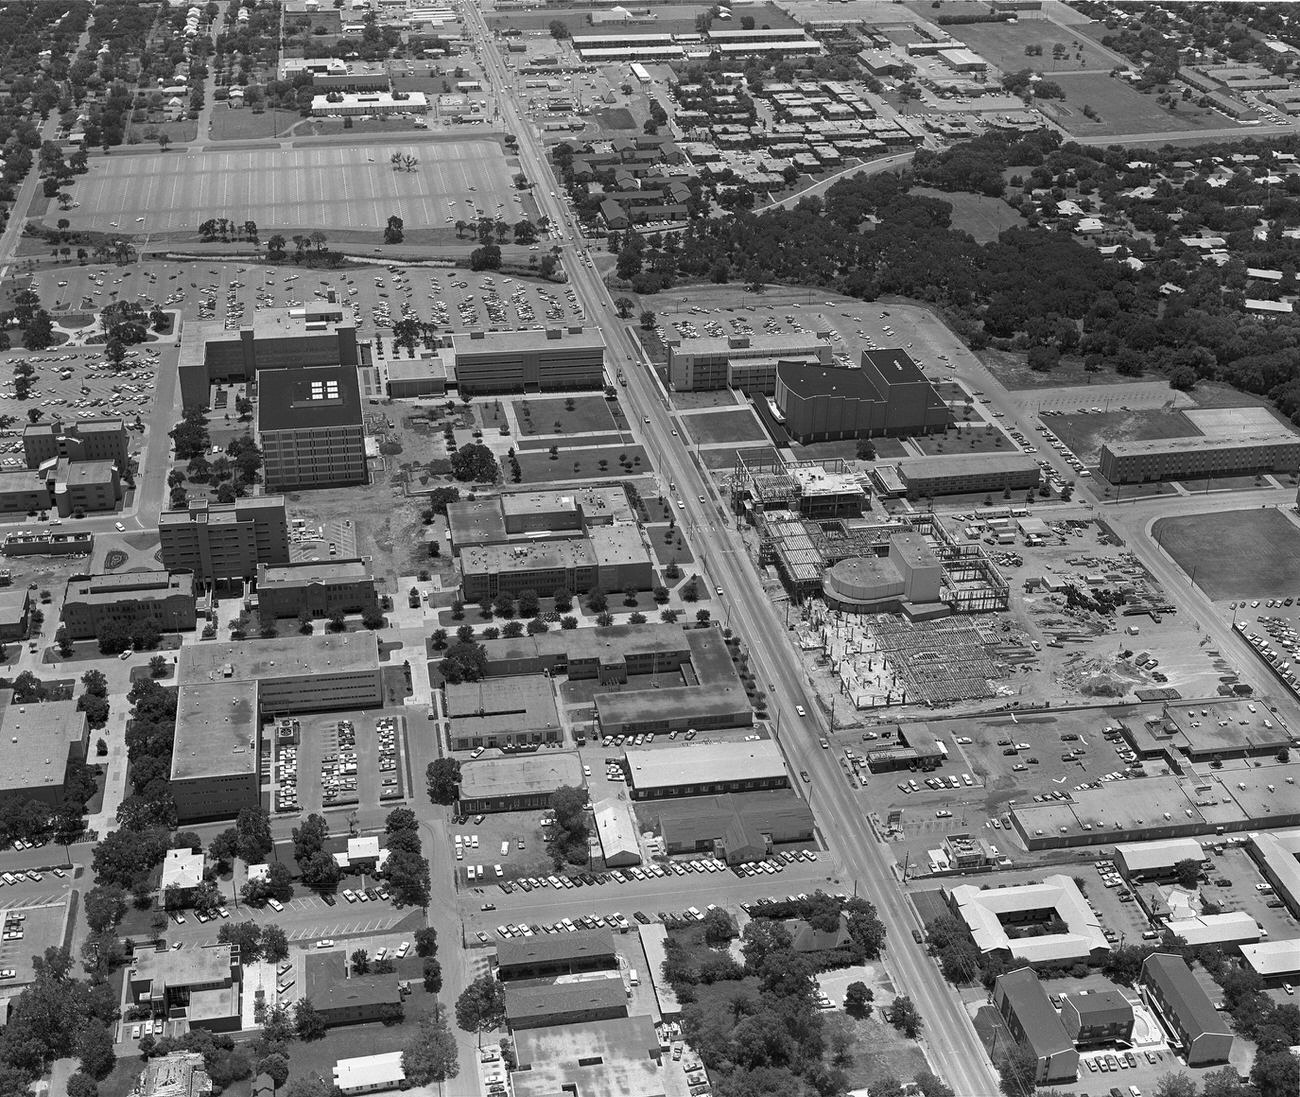 An airview of University of Texas at Arlington (U. T. A.) looking south, 1973